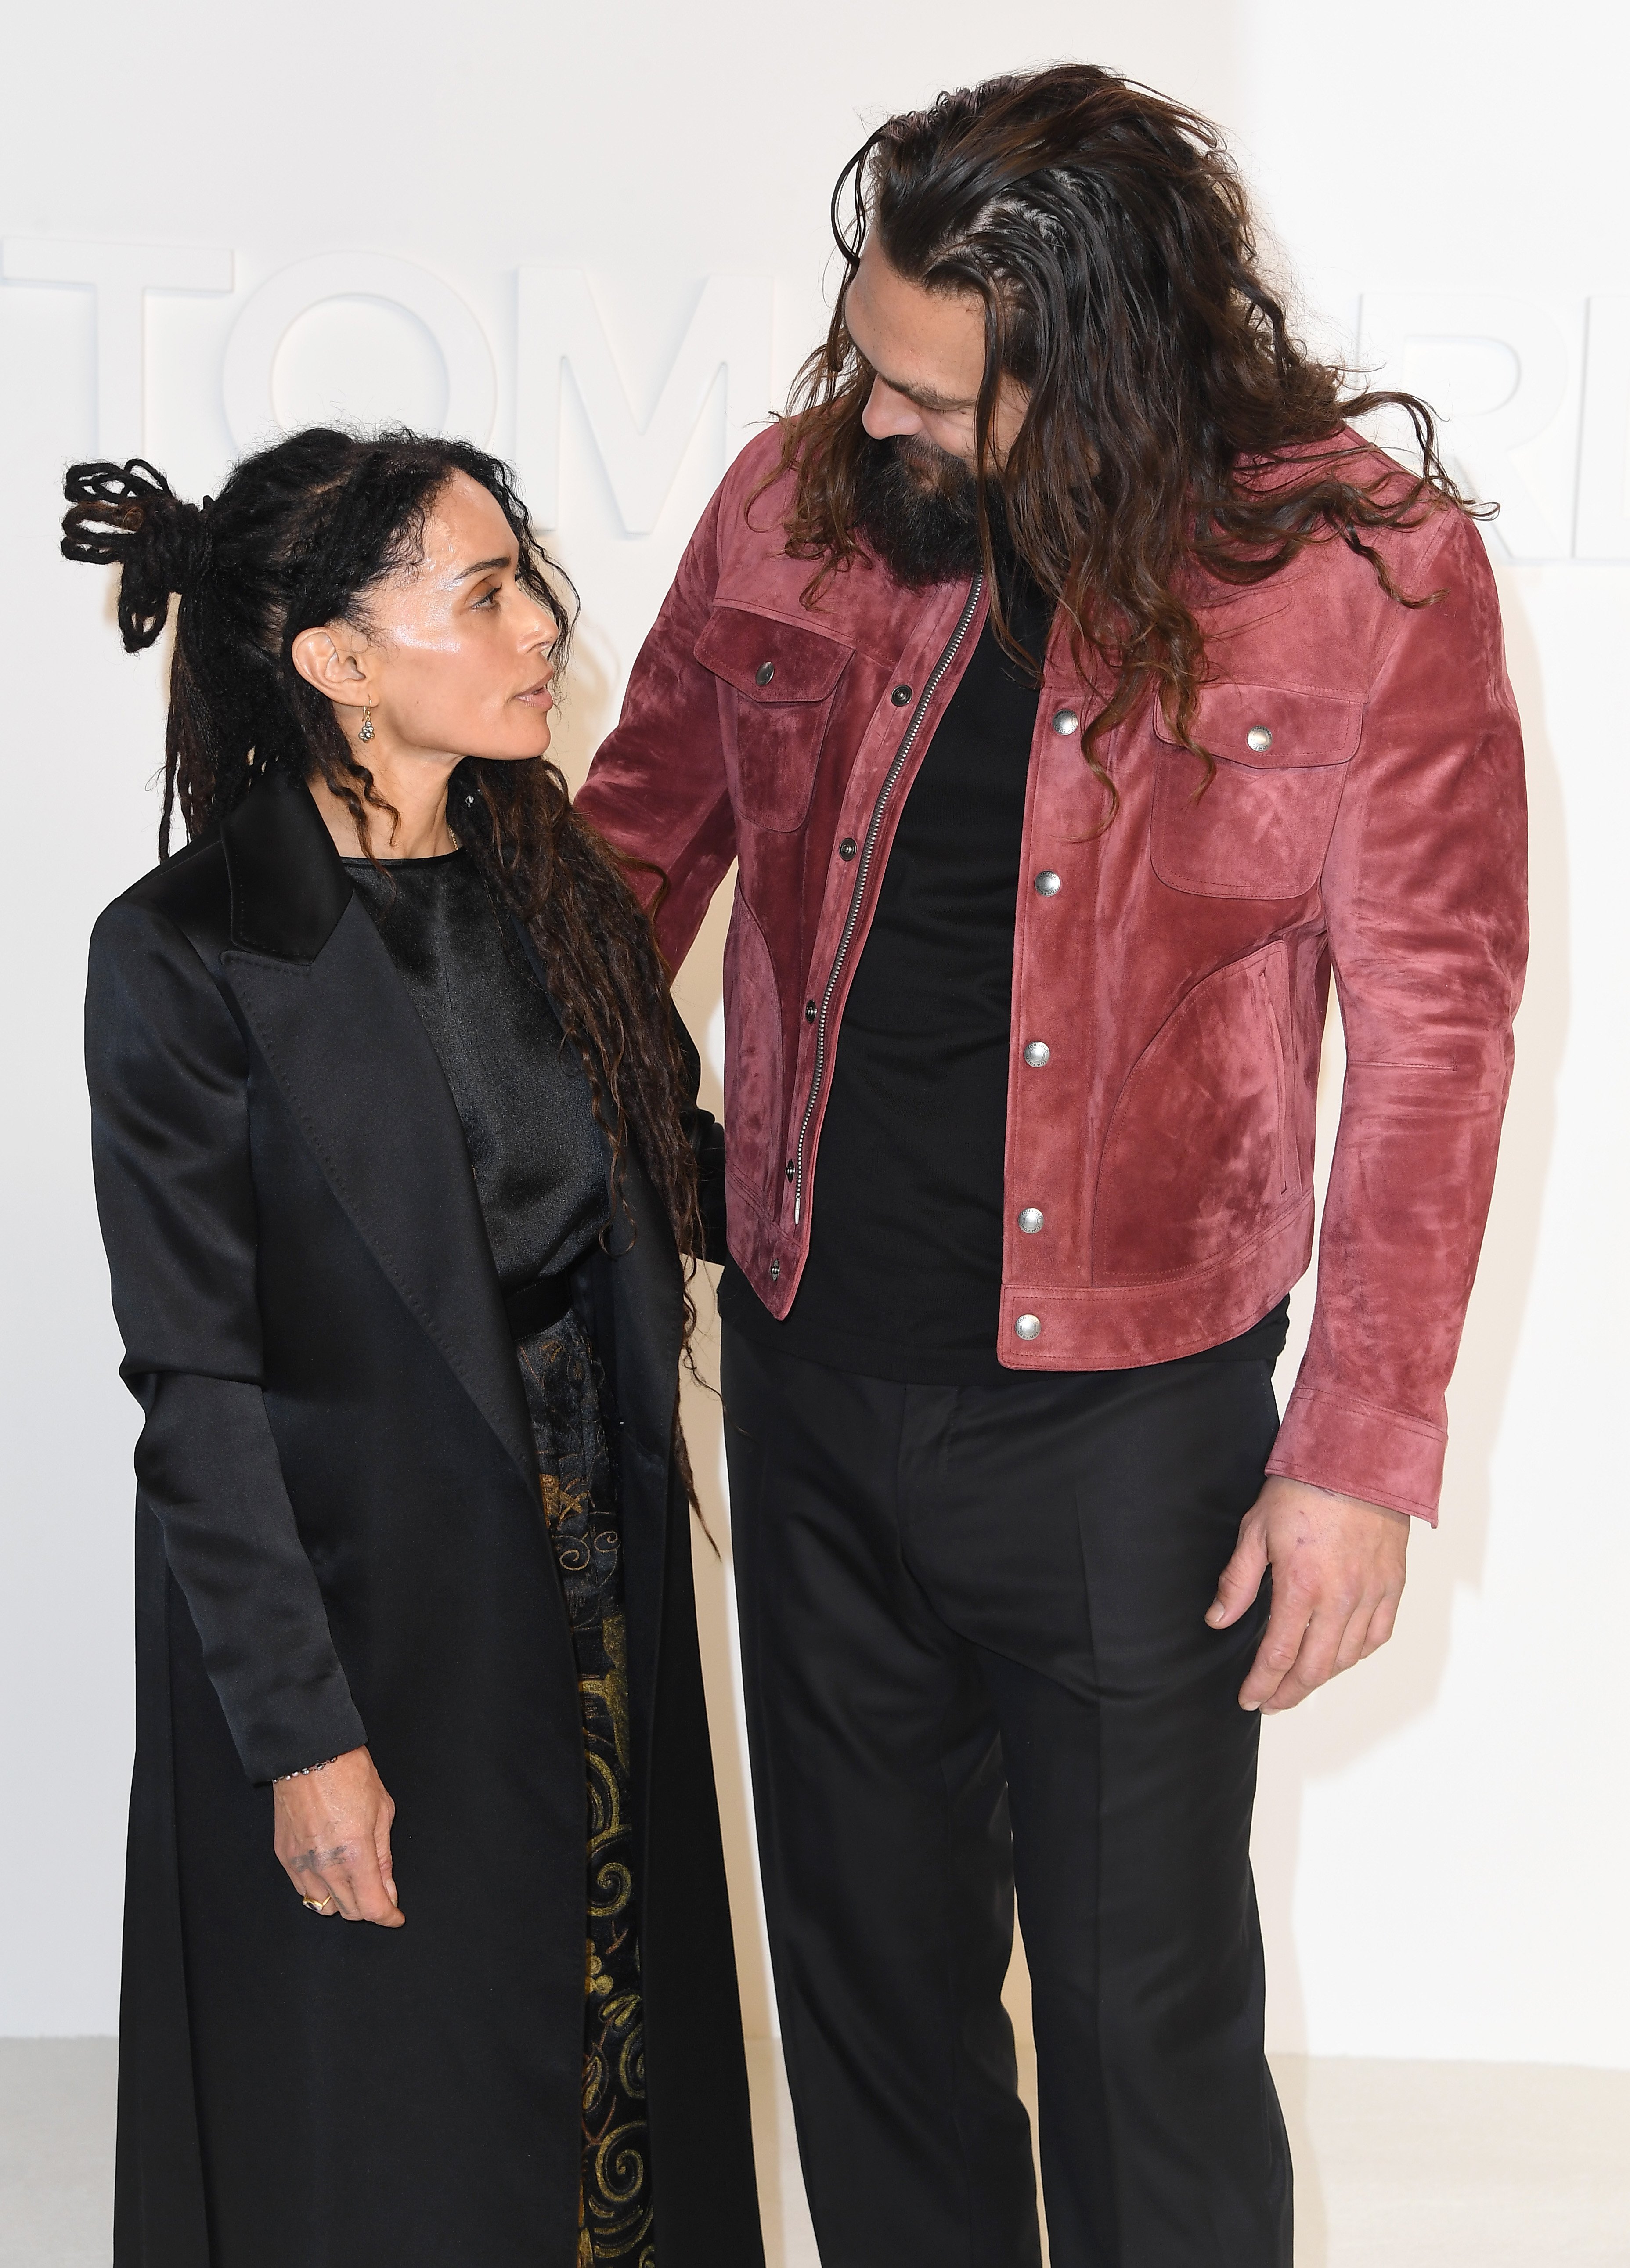 Jason Momoa and Lisa Bonet arrives at the Tom Ford AW20 Show at Milk Studios on February 07, 2020 in Hollywood, California. | Source: Getty Images